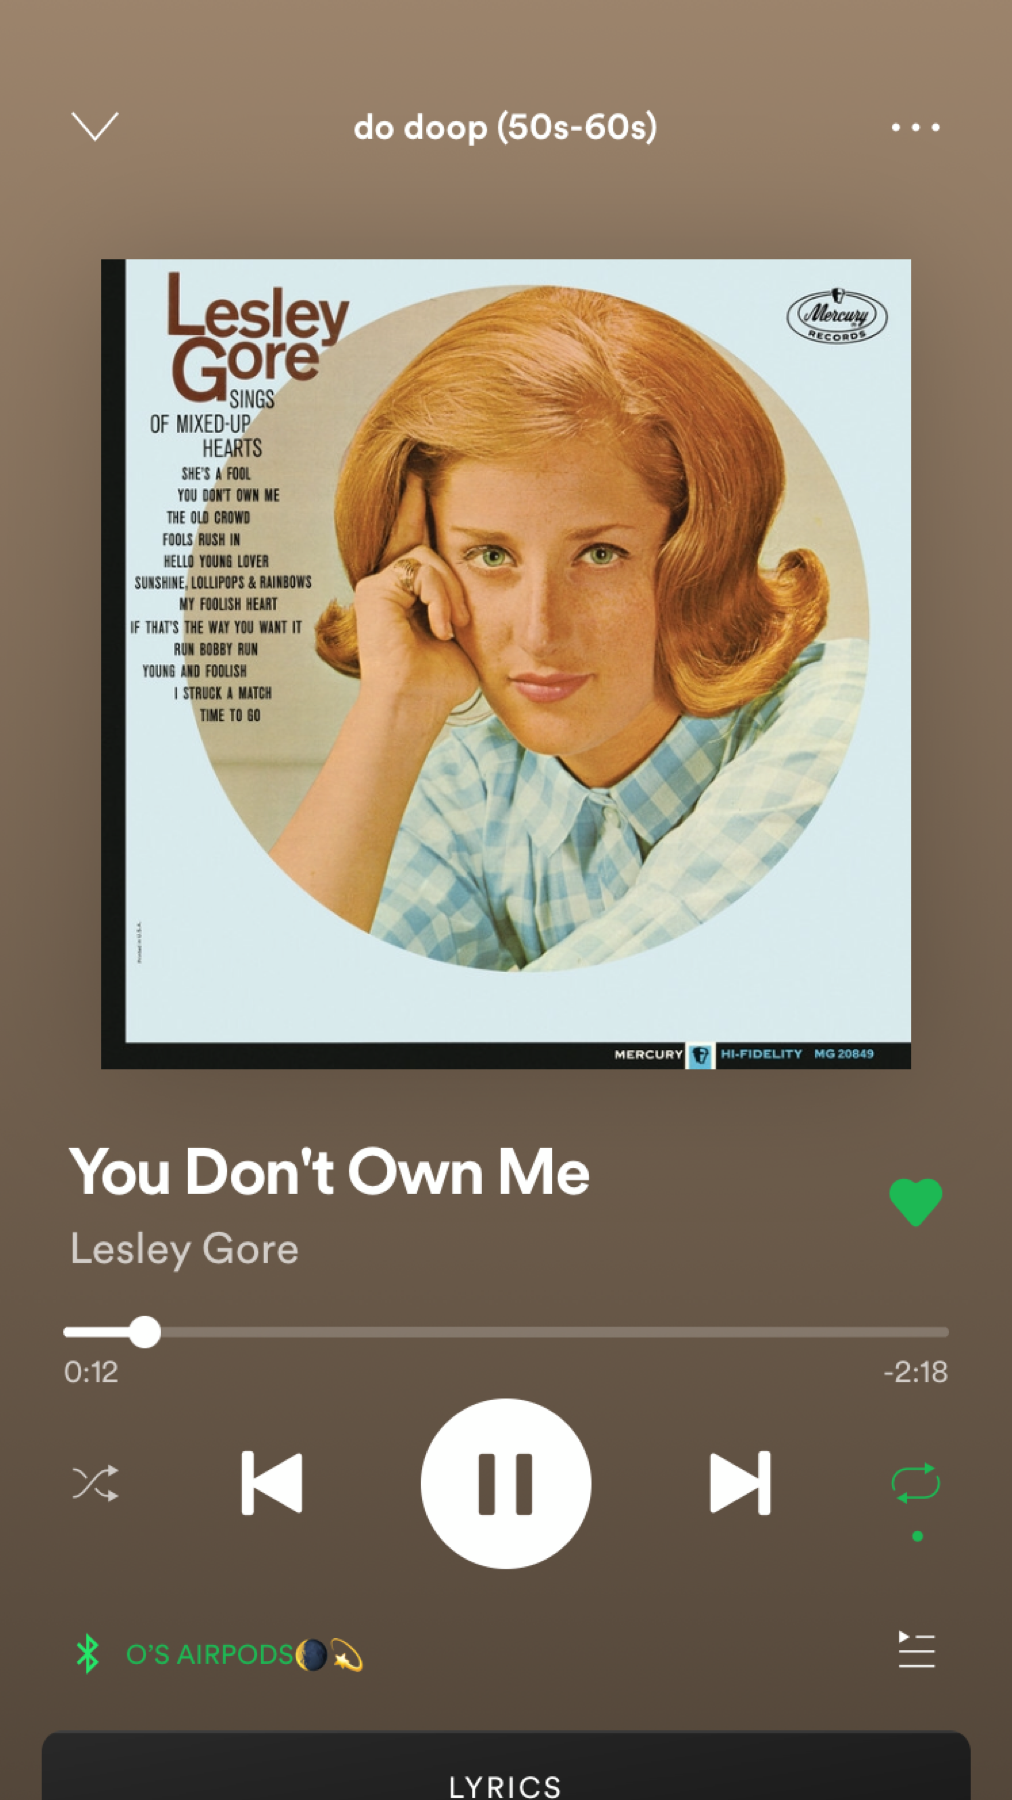 can I just say that this is one of the most iconic songs to exist bc 1. She was singing against the sexist, misogynist culture in 1963! 2. She was a lesbian and revealed it openly later in 2004, but had been with her partner for 23 years 👏🏼👏🏼